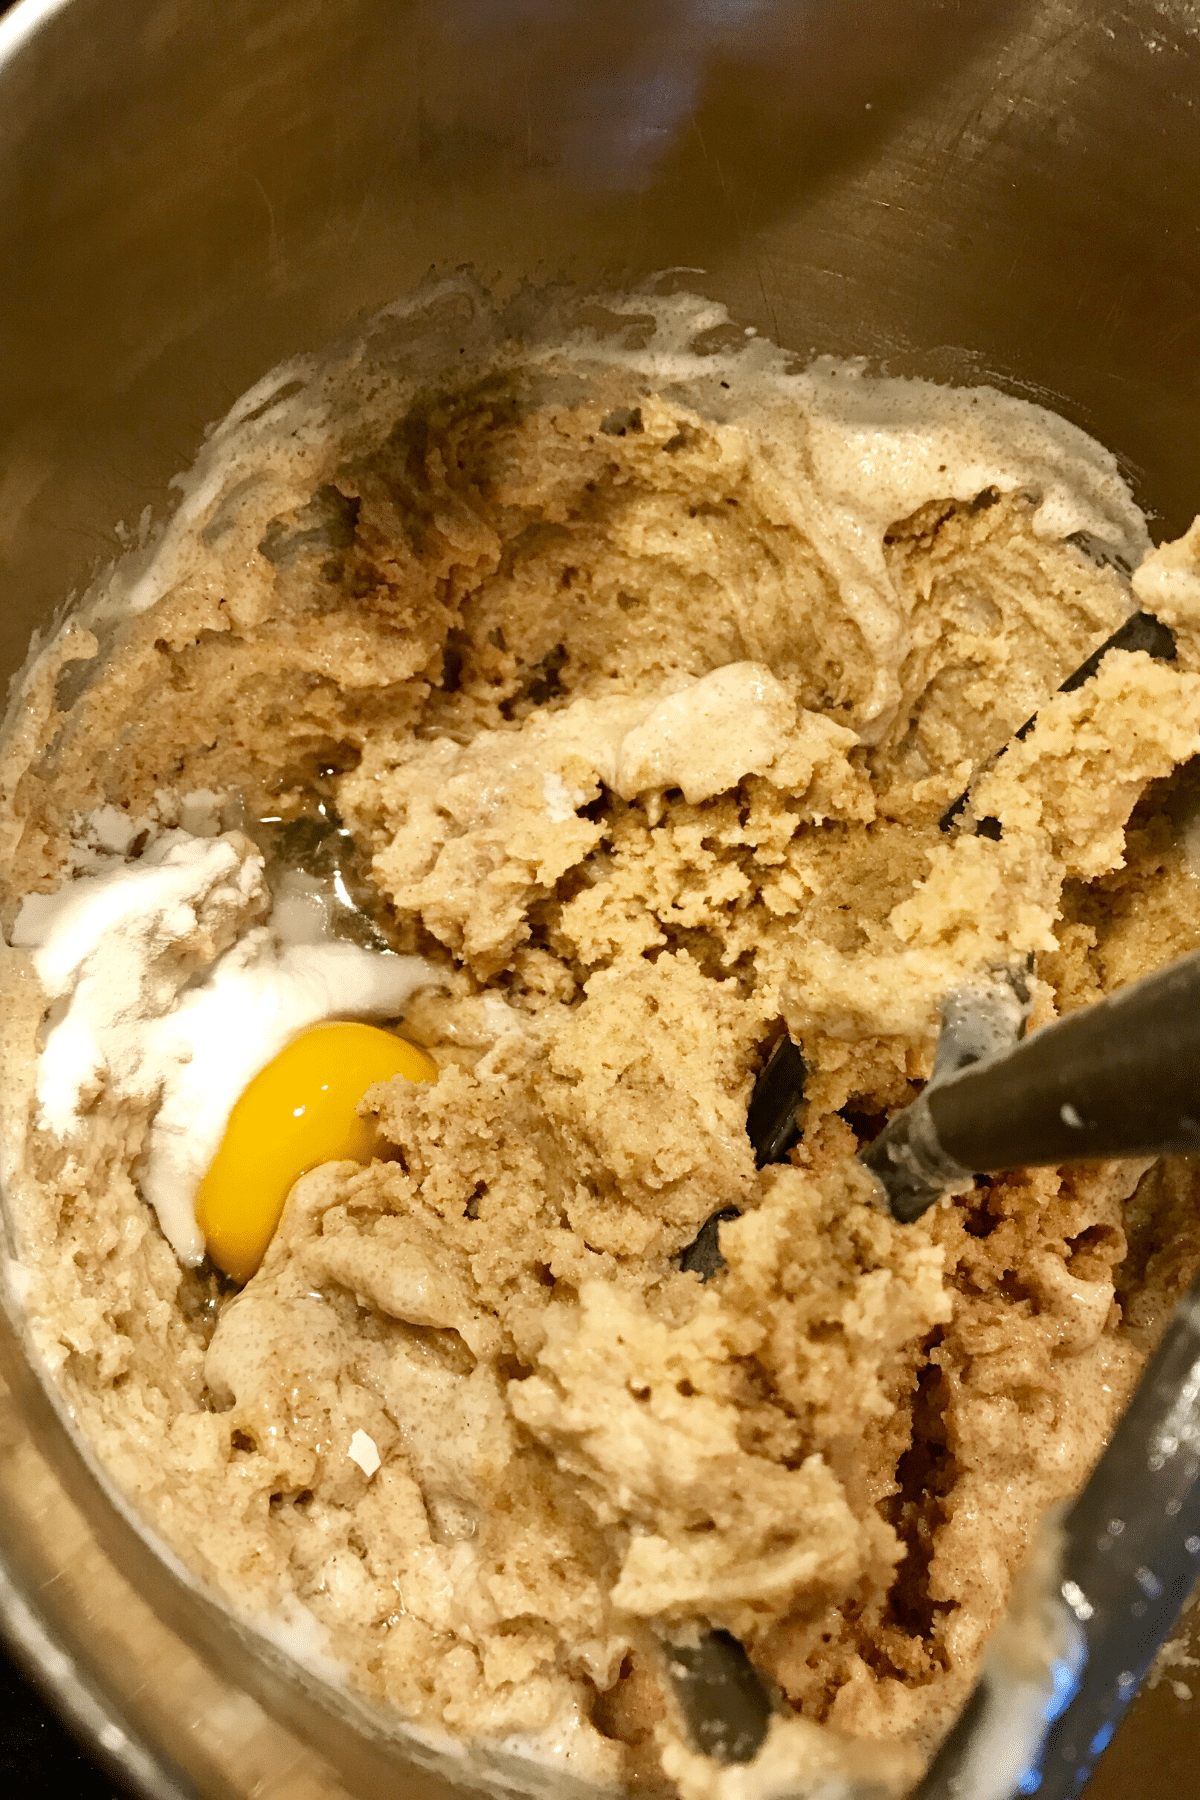 Buttermilk, egg and baking soda added to batter. 